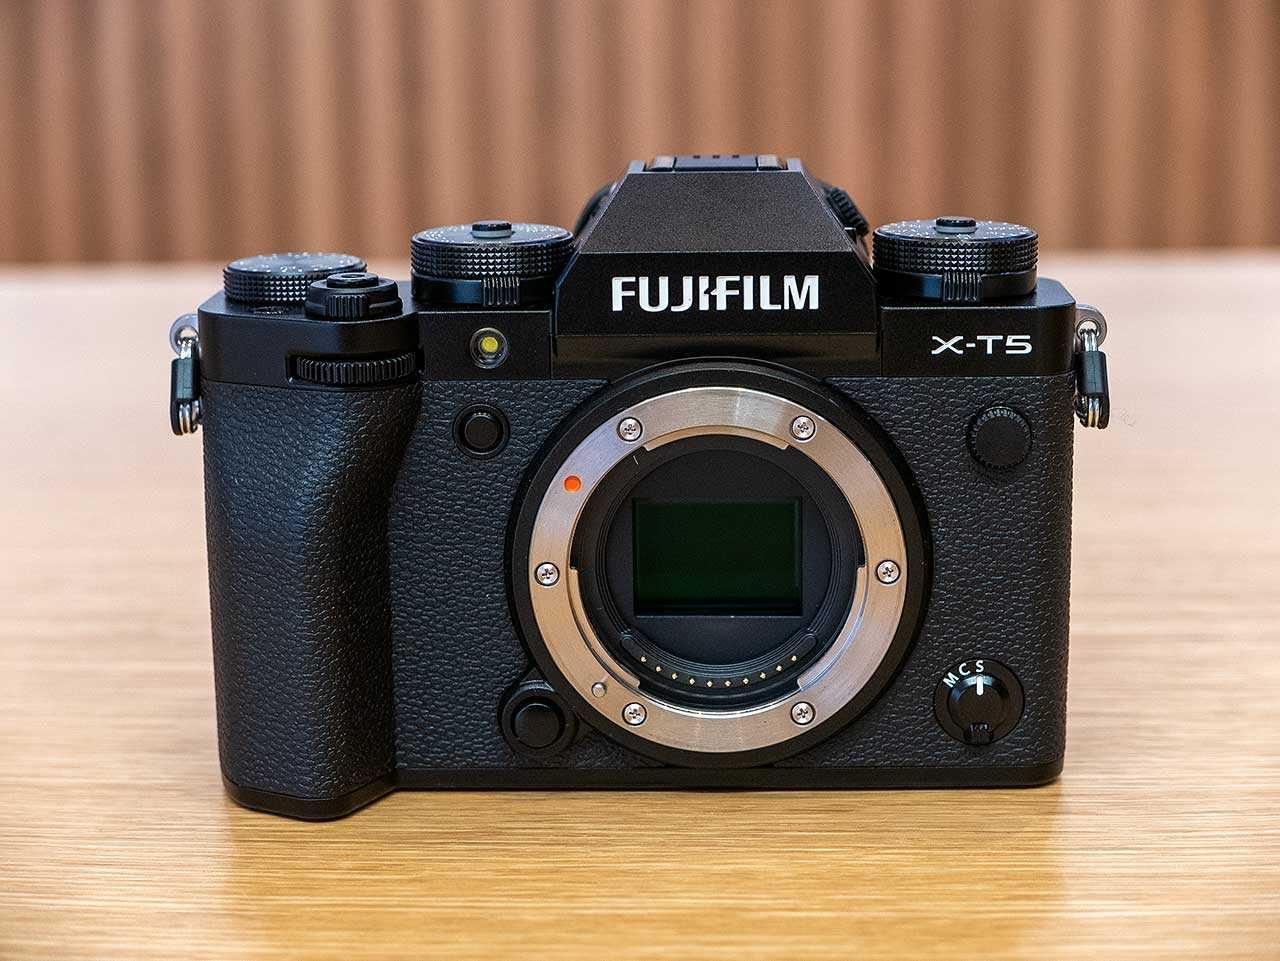 Fujifilm XT4 and XT5 vs. X Pro 3: Which is Better?